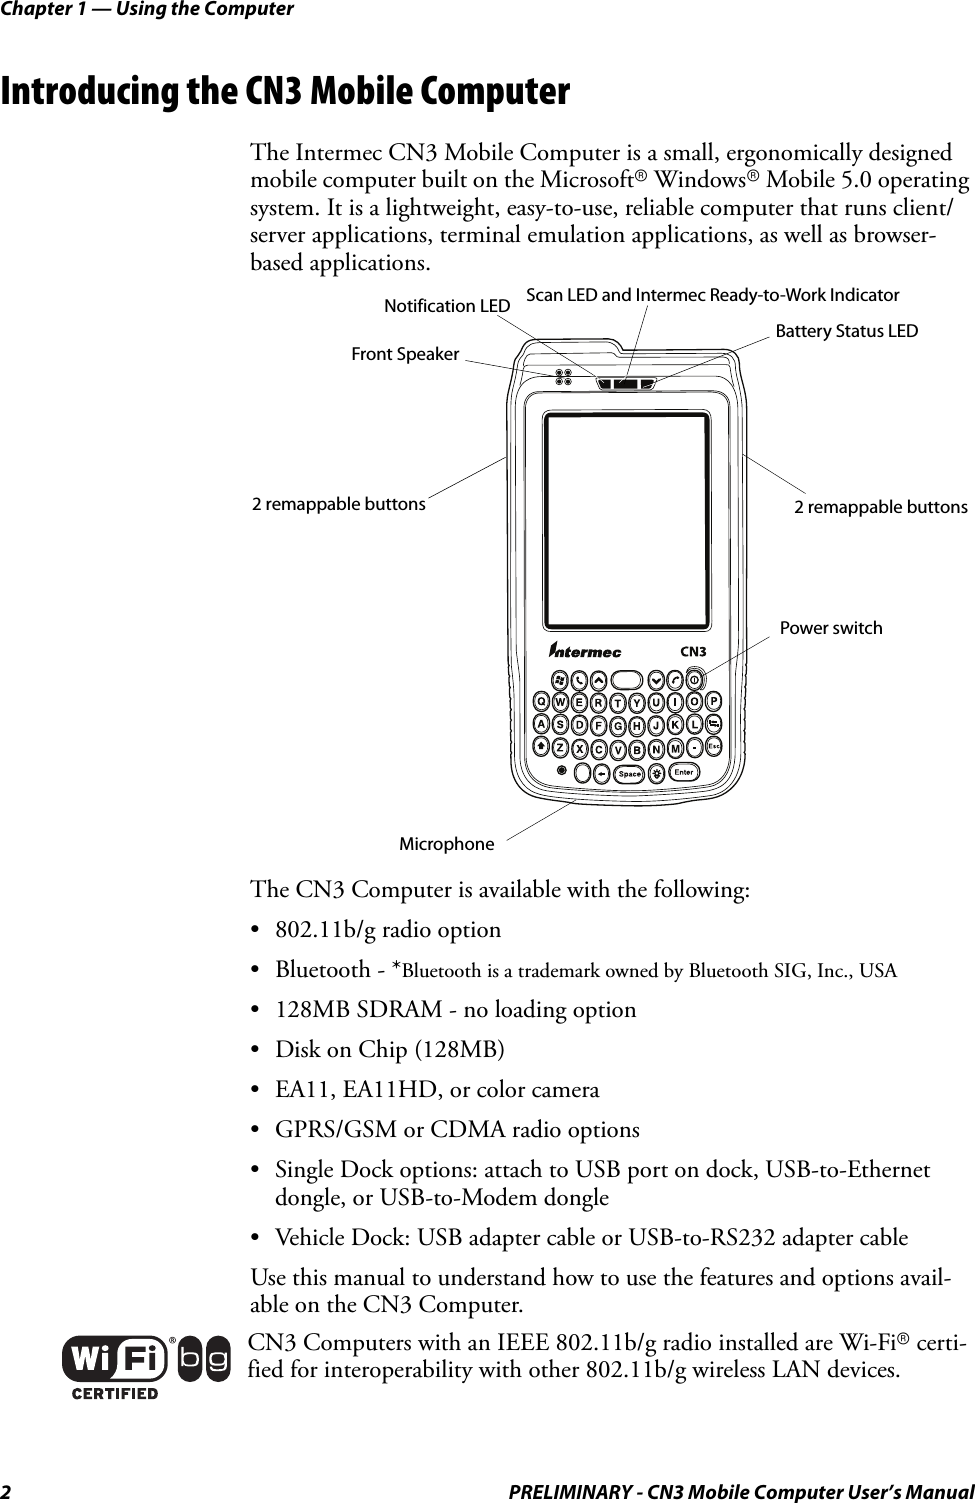 Chapter 1 — Using the Computer2 PRELIMINARY - CN3 Mobile Computer User’s ManualIntroducing the CN3 Mobile ComputerThe Intermec CN3 Mobile Computer is a small, ergonomically designed mobile computer built on the Microsoftr Windowsr Mobile 5.0 operating system. It is a lightweight, easy-to-use, reliable computer that runs client/server applications, terminal emulation applications, as well as browser-based applications.The CN3 Computer is available with the following:• 802.11b/g radio option• Bluetooth - *Bluetooth is a trademark owned by Bluetooth SIG, Inc., USA• 128MB SDRAM - no loading option• Disk on Chip (128MB)• EA11, EA11HD, or color camera• GPRS/GSM or CDMA radio options• Single Dock options: attach to USB port on dock, USB-to-Ethernet dongle, or USB-to-Modem dongle• Vehicle Dock: USB adapter cable or USB-to-RS232 adapter cableUse this manual to understand how to use the features and options avail-able on the CN3 Computer.CN3 Computers with an IEEE 802.11b/g radio installed are Wi-Fir certi-fied for interoperability with other 802.11b/g wireless LAN devices.Battery Status LEDScan LED and Intermec Ready-to-Work IndicatorMicrophoneFront Speaker 2 remappable buttonsNotification LED2 remappable buttonsPower switch